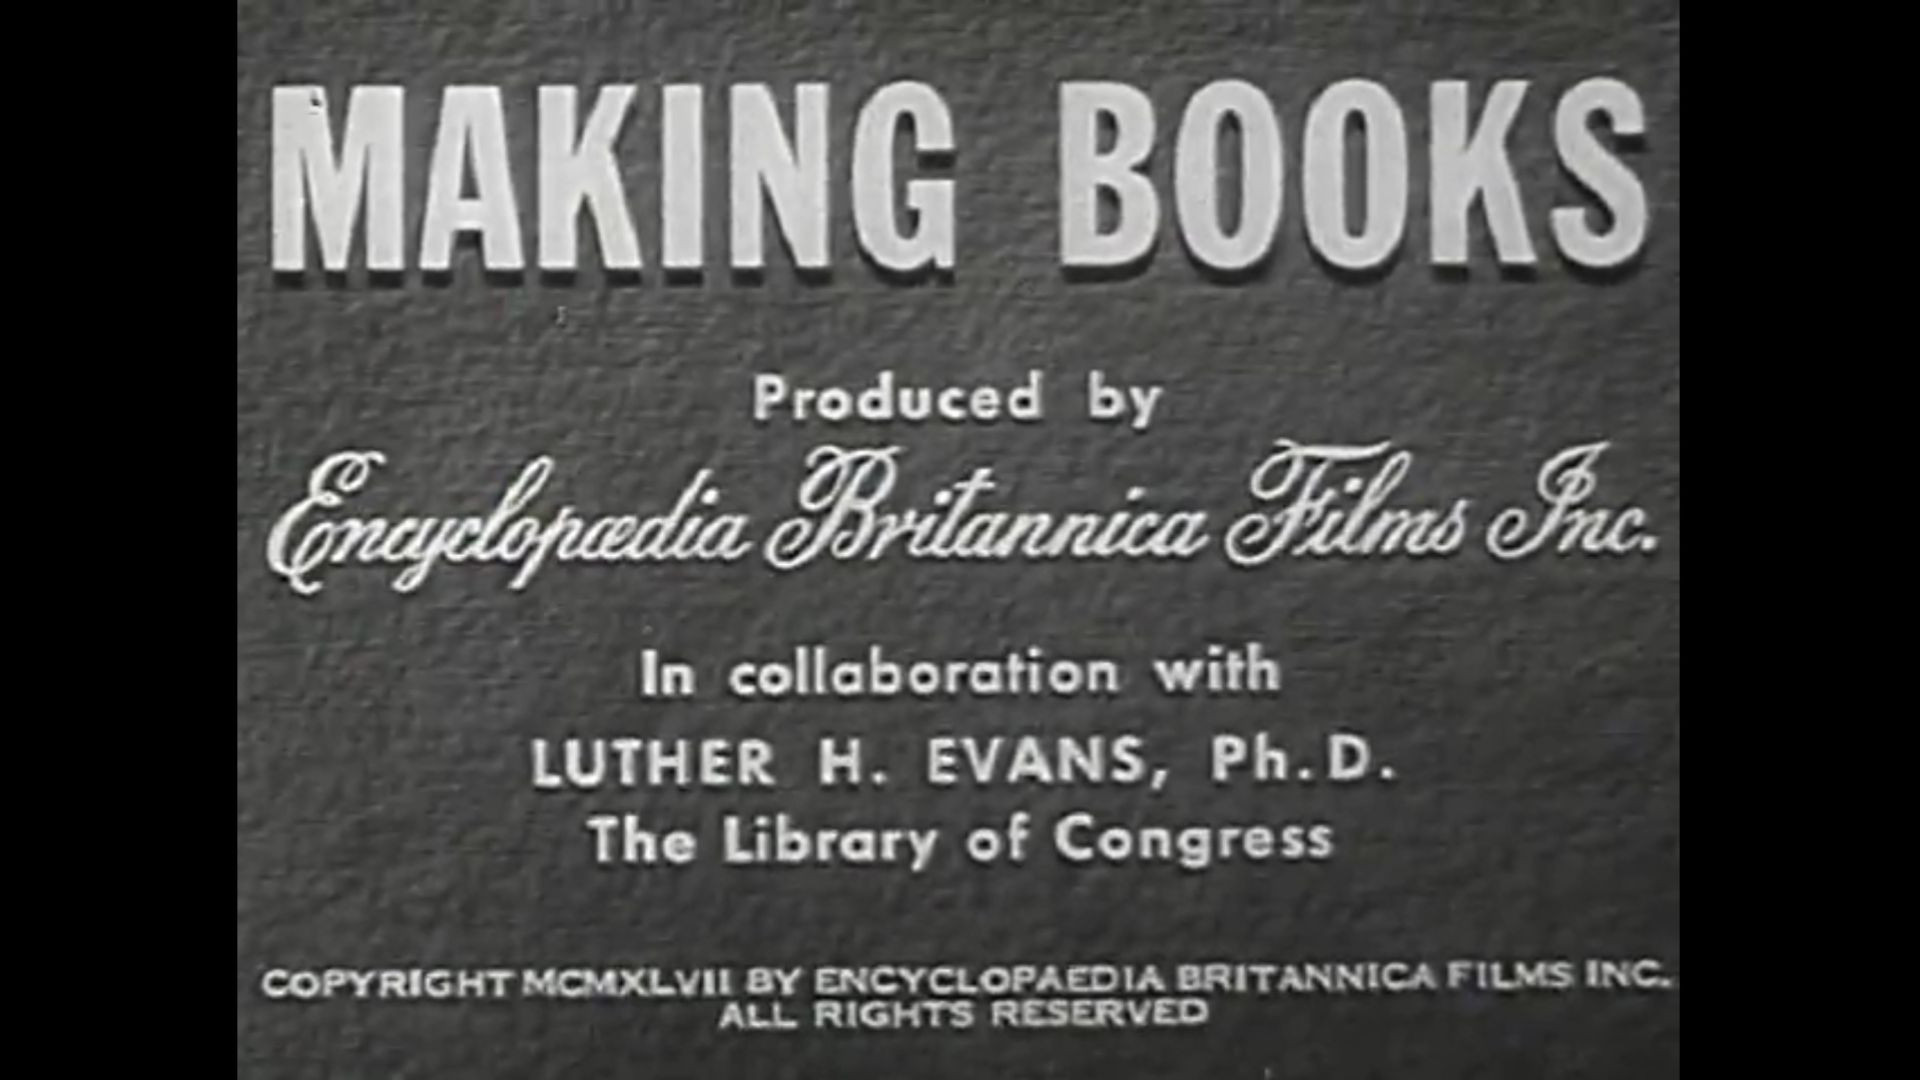 Making Books by Encyclopedia Britannica Films (1947)